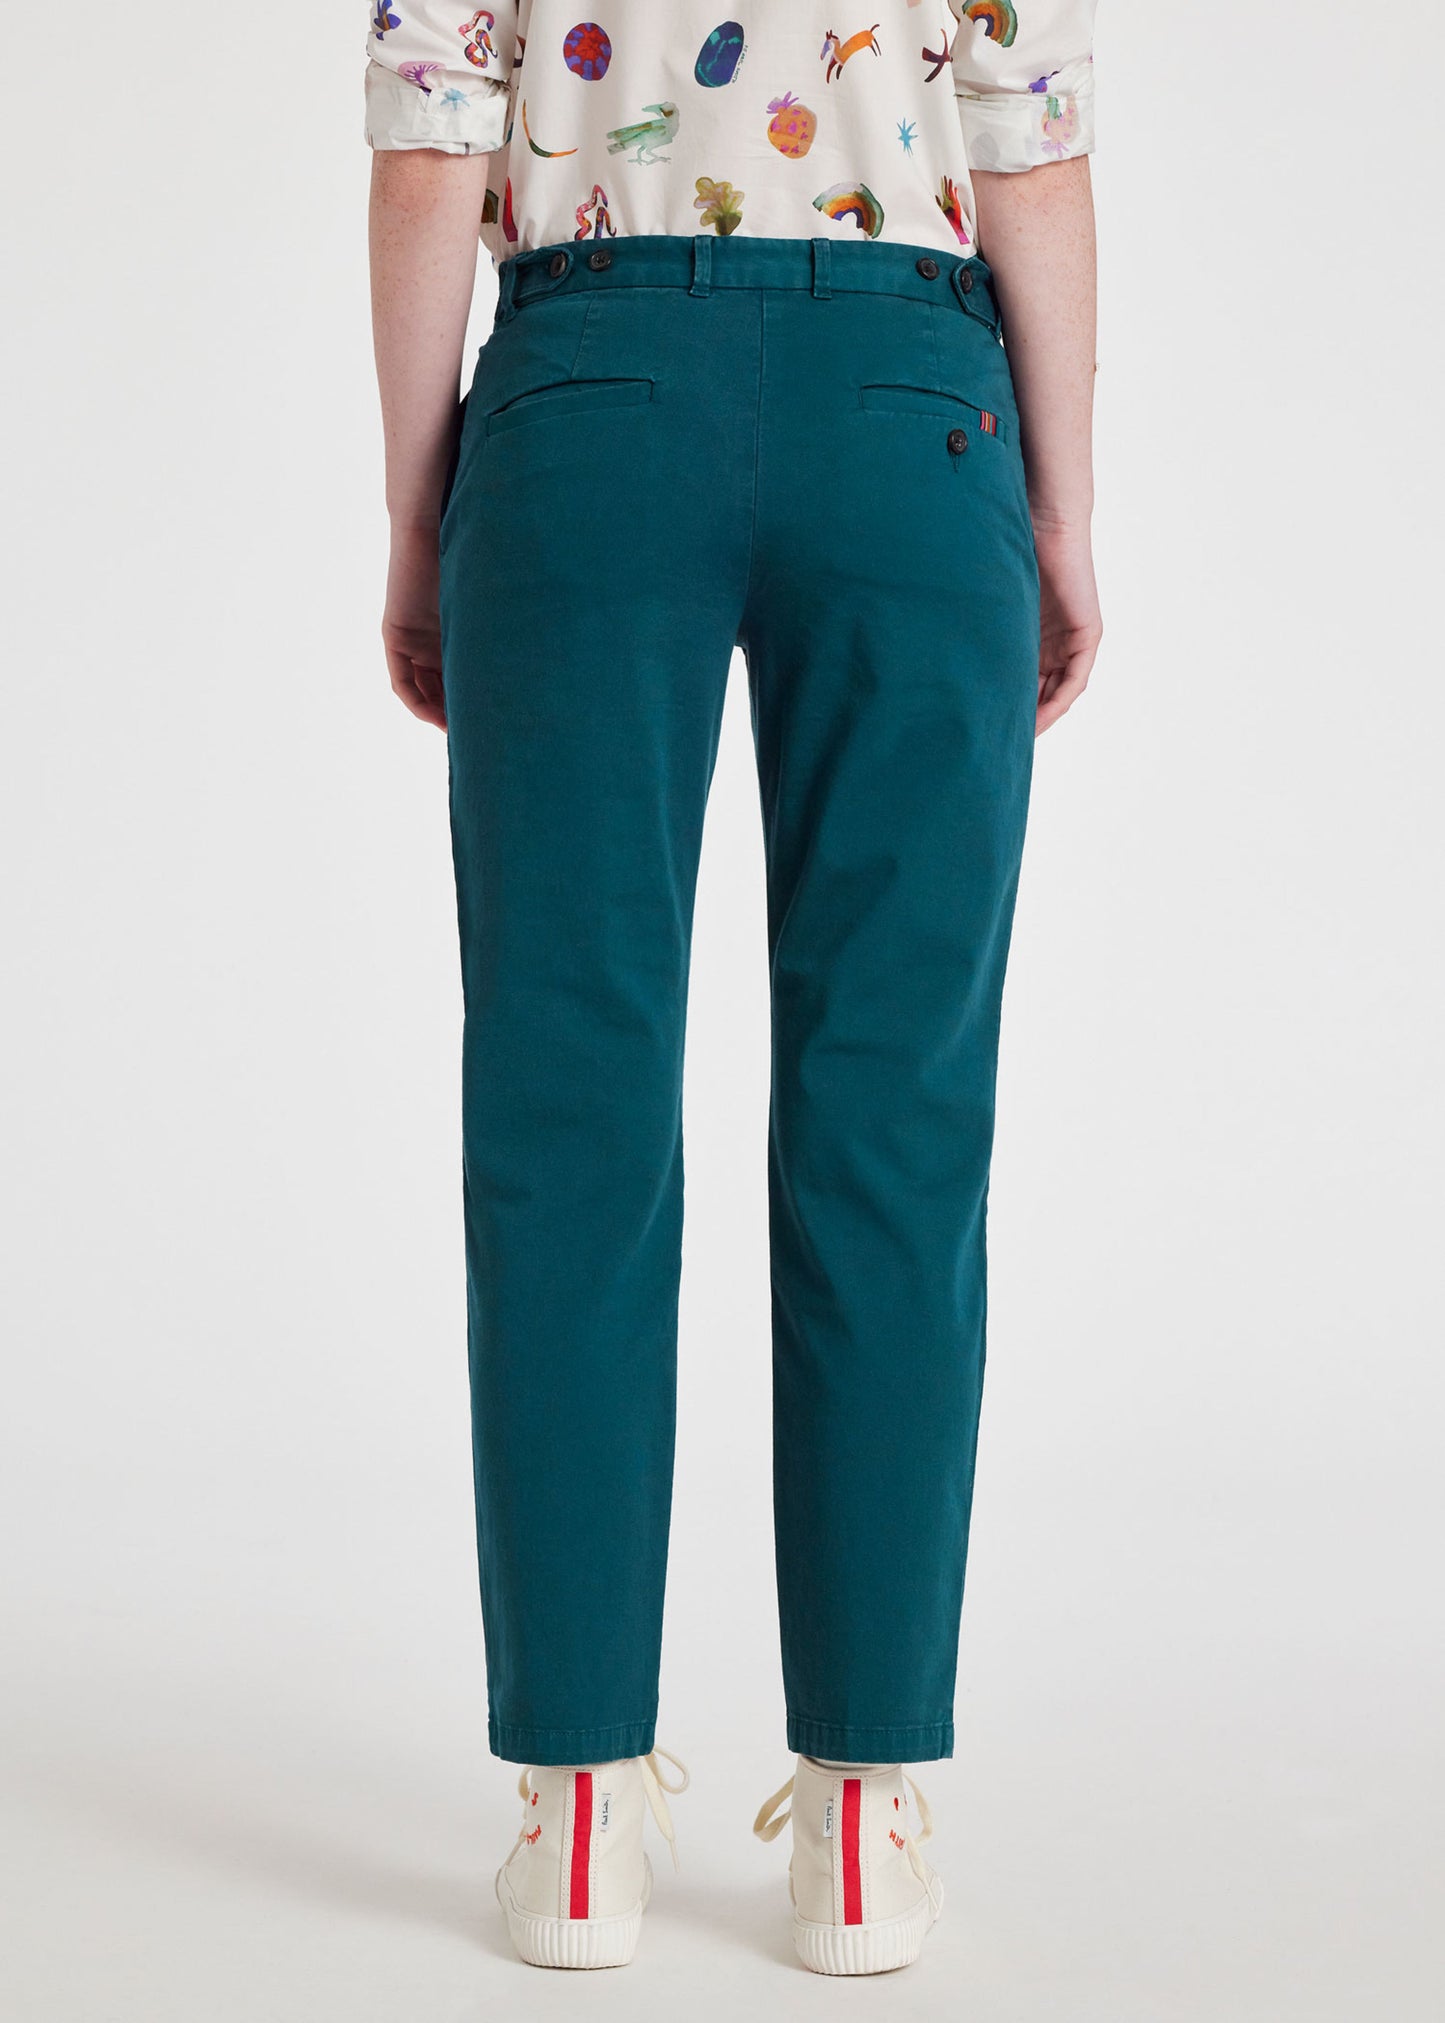 OUTLET Paul Smith Broek Chino Petrol